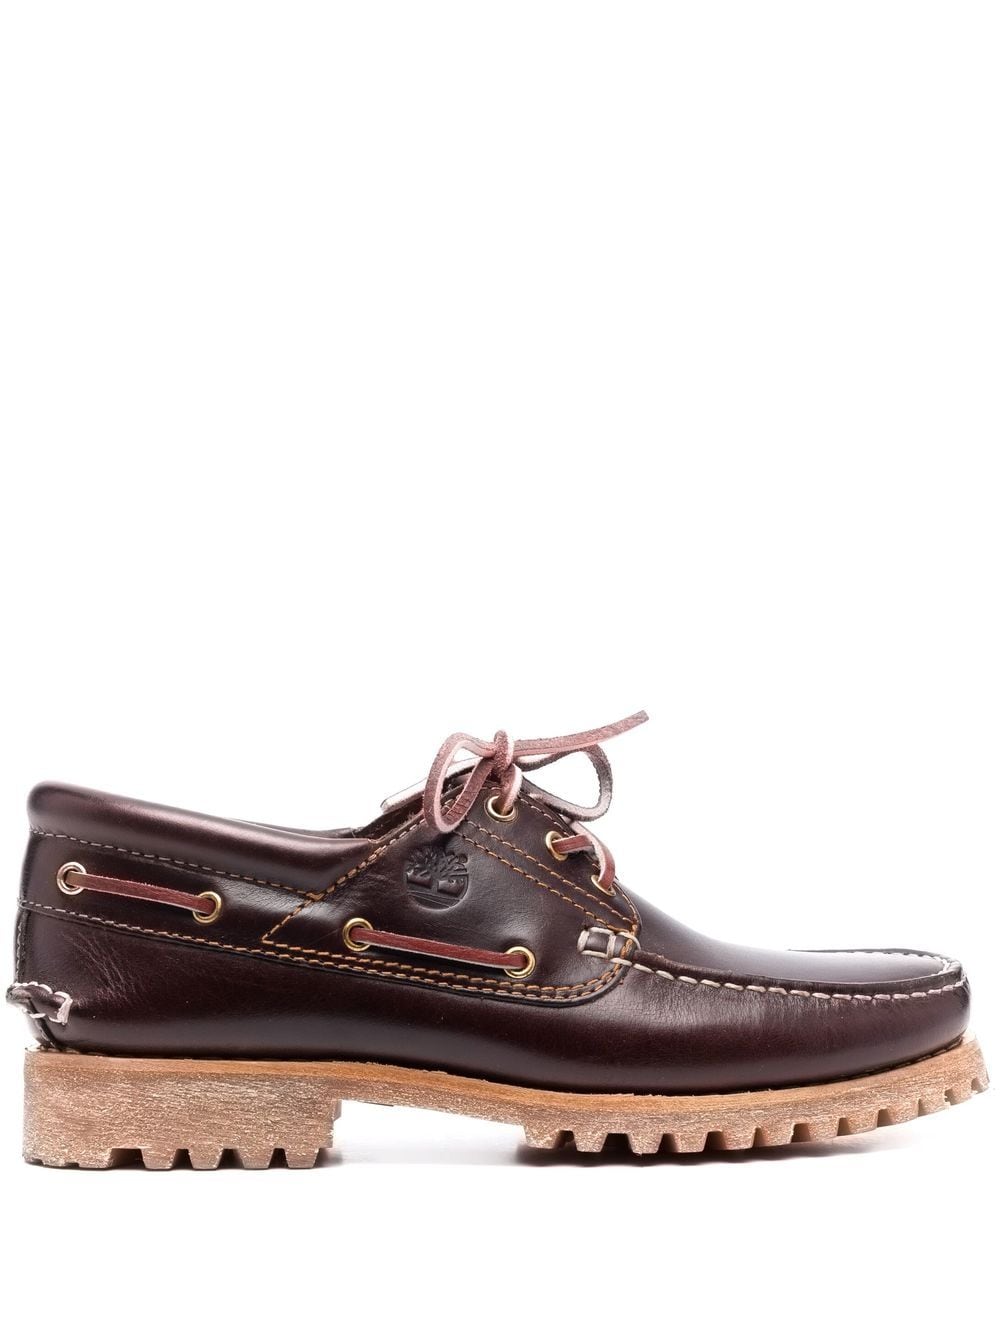 Timberland Handsewn boat shoes - Brown von Timberland